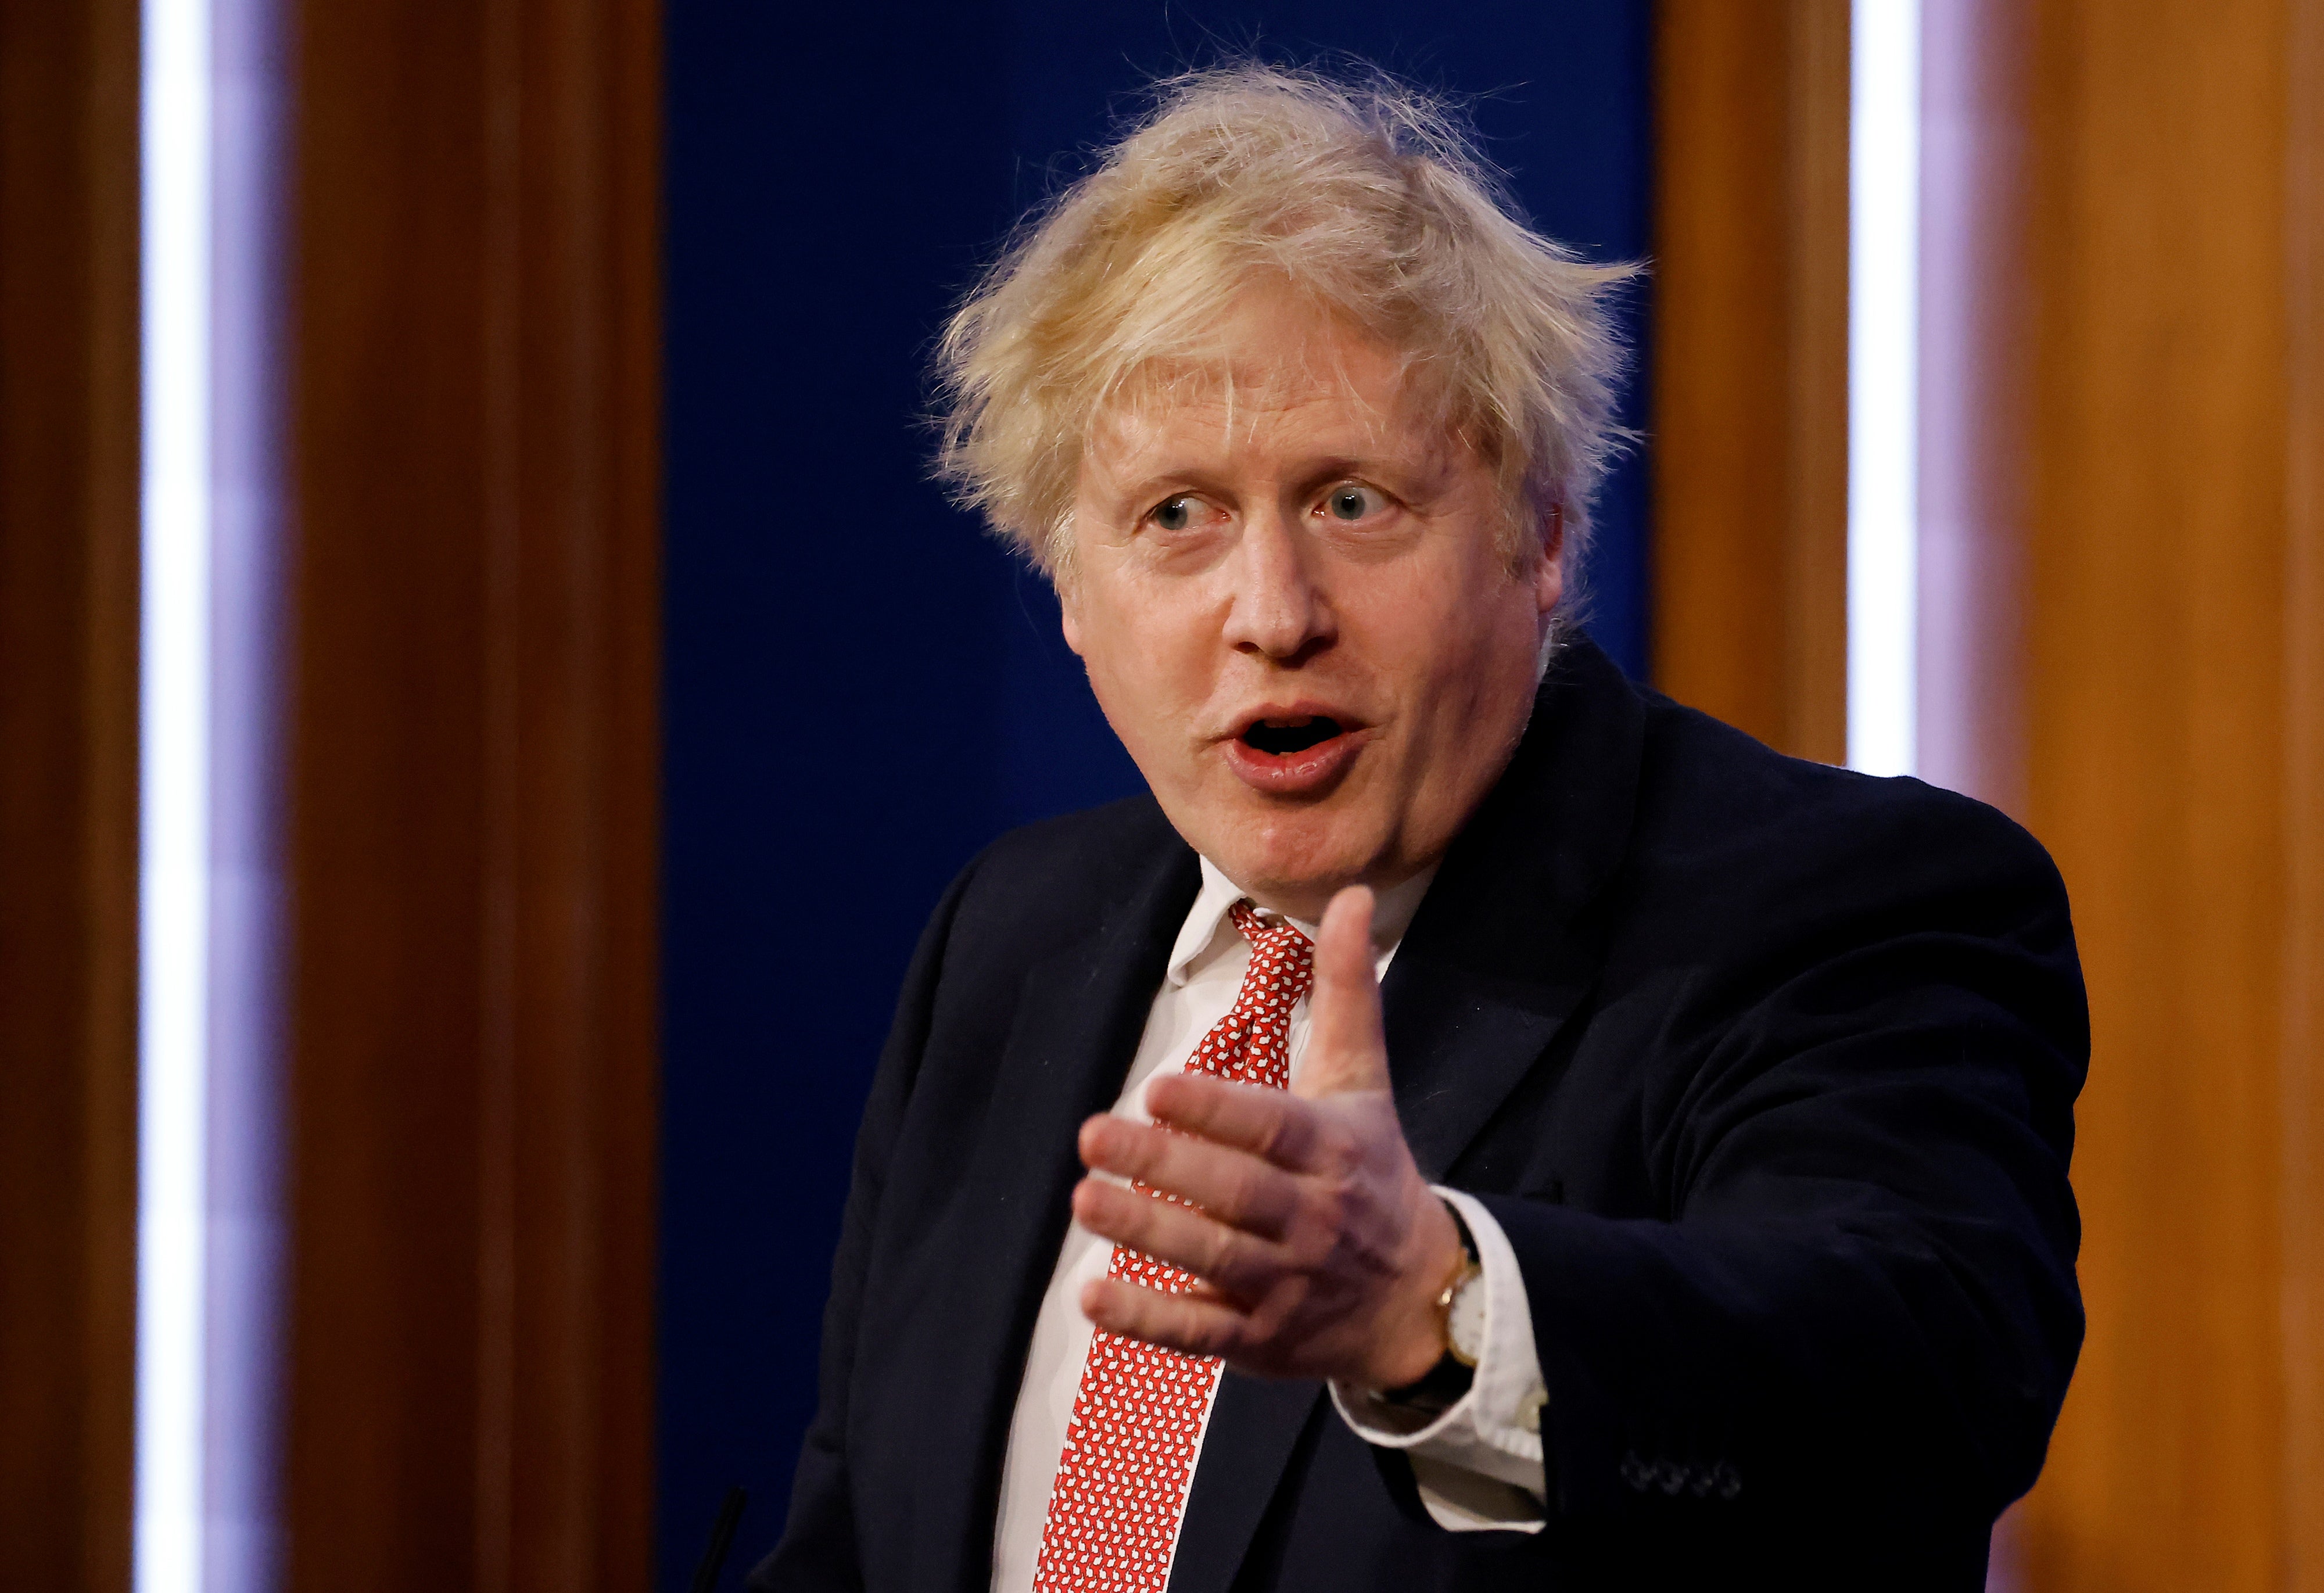 Prime Minister Boris Johnson says Russia should be stripped from holding the Champions League final (Tolga Akmen/PA)